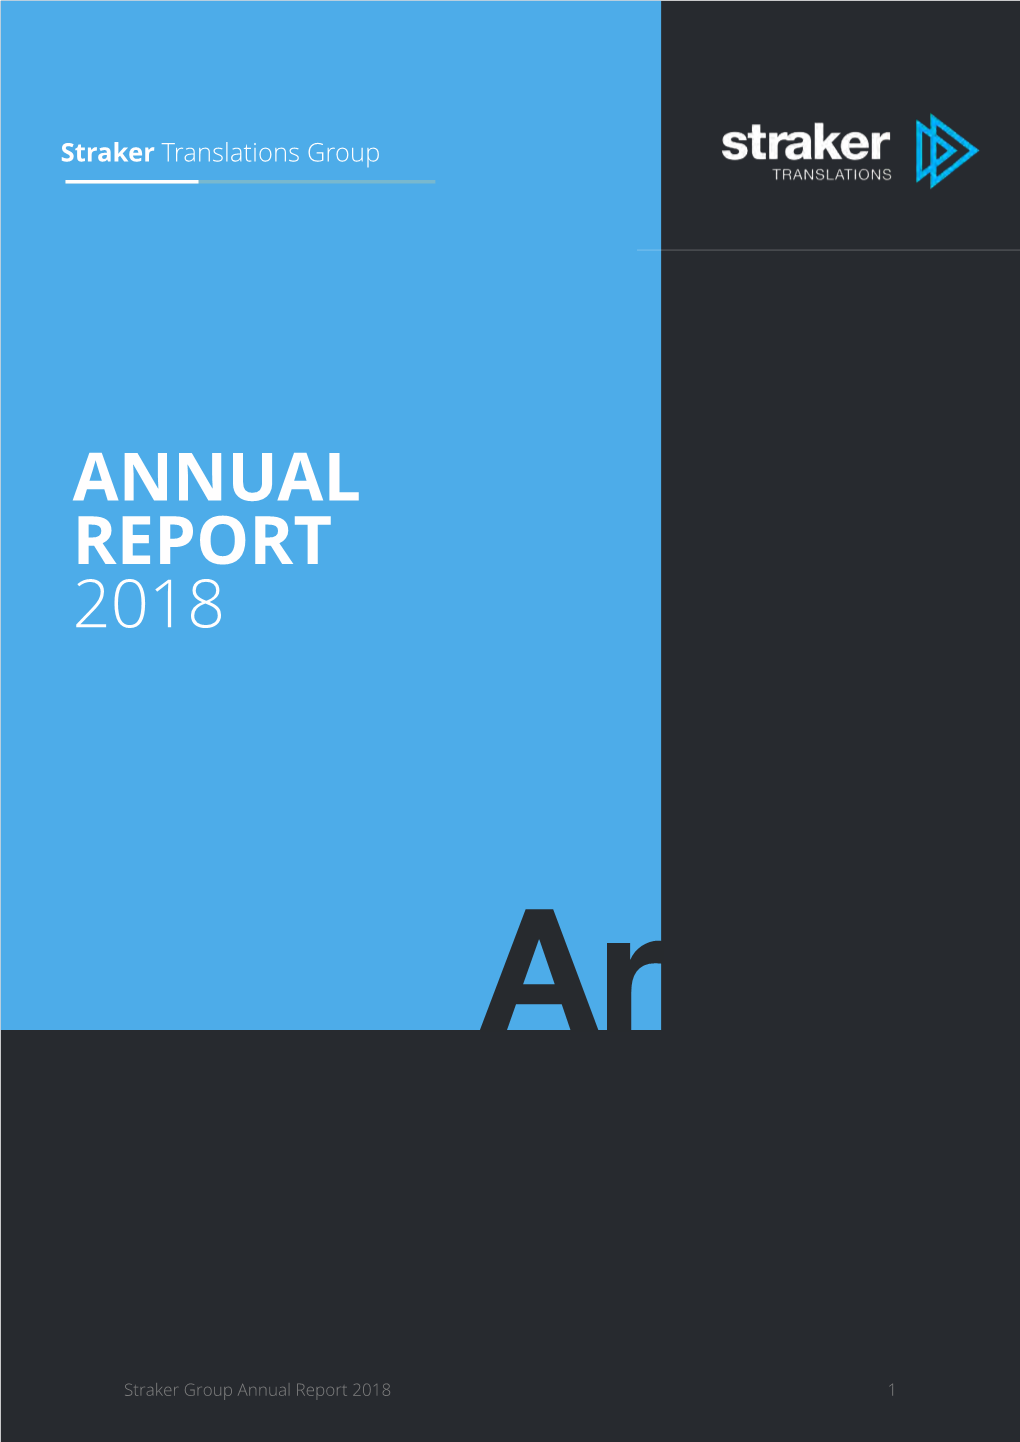 Annual Report for Year Ended 31 March 2018